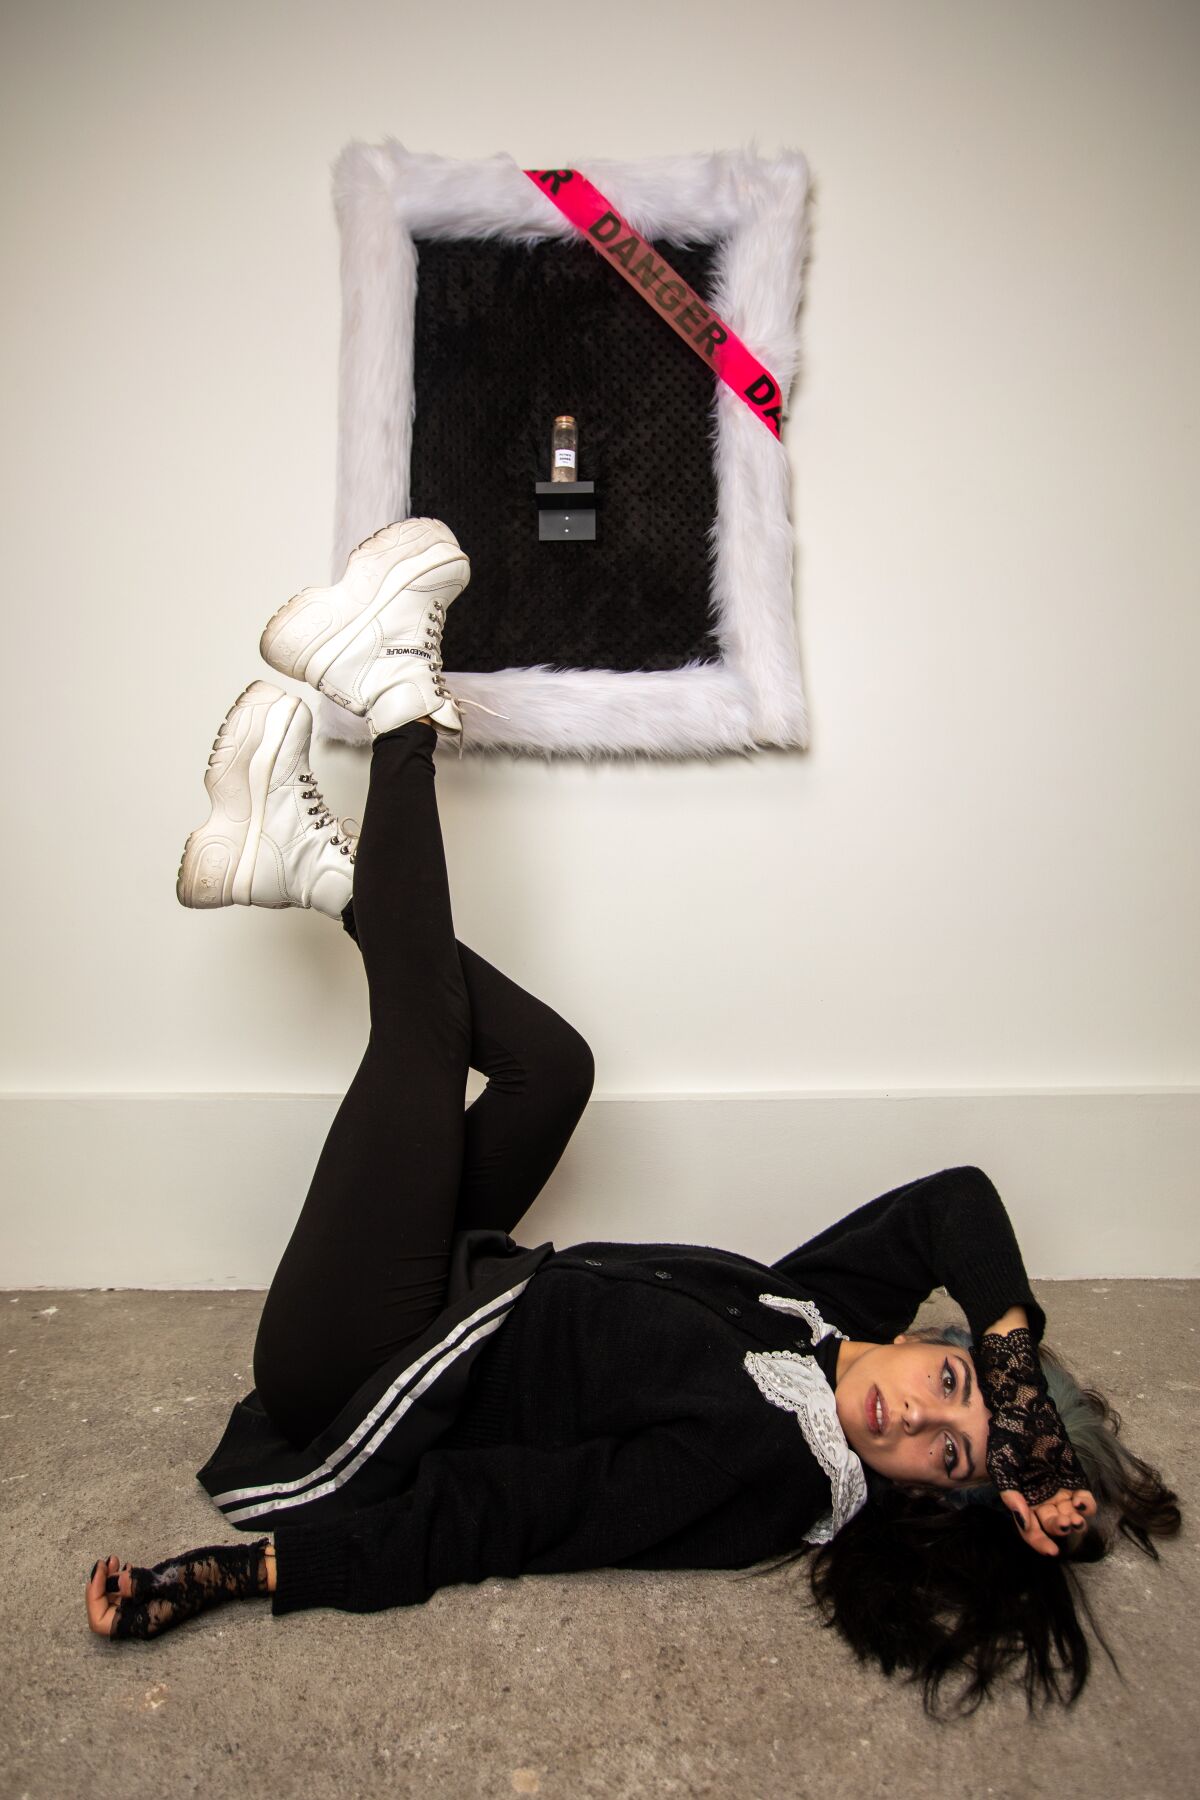 a woman with dark hair poses on a floor next to a framed artwork.